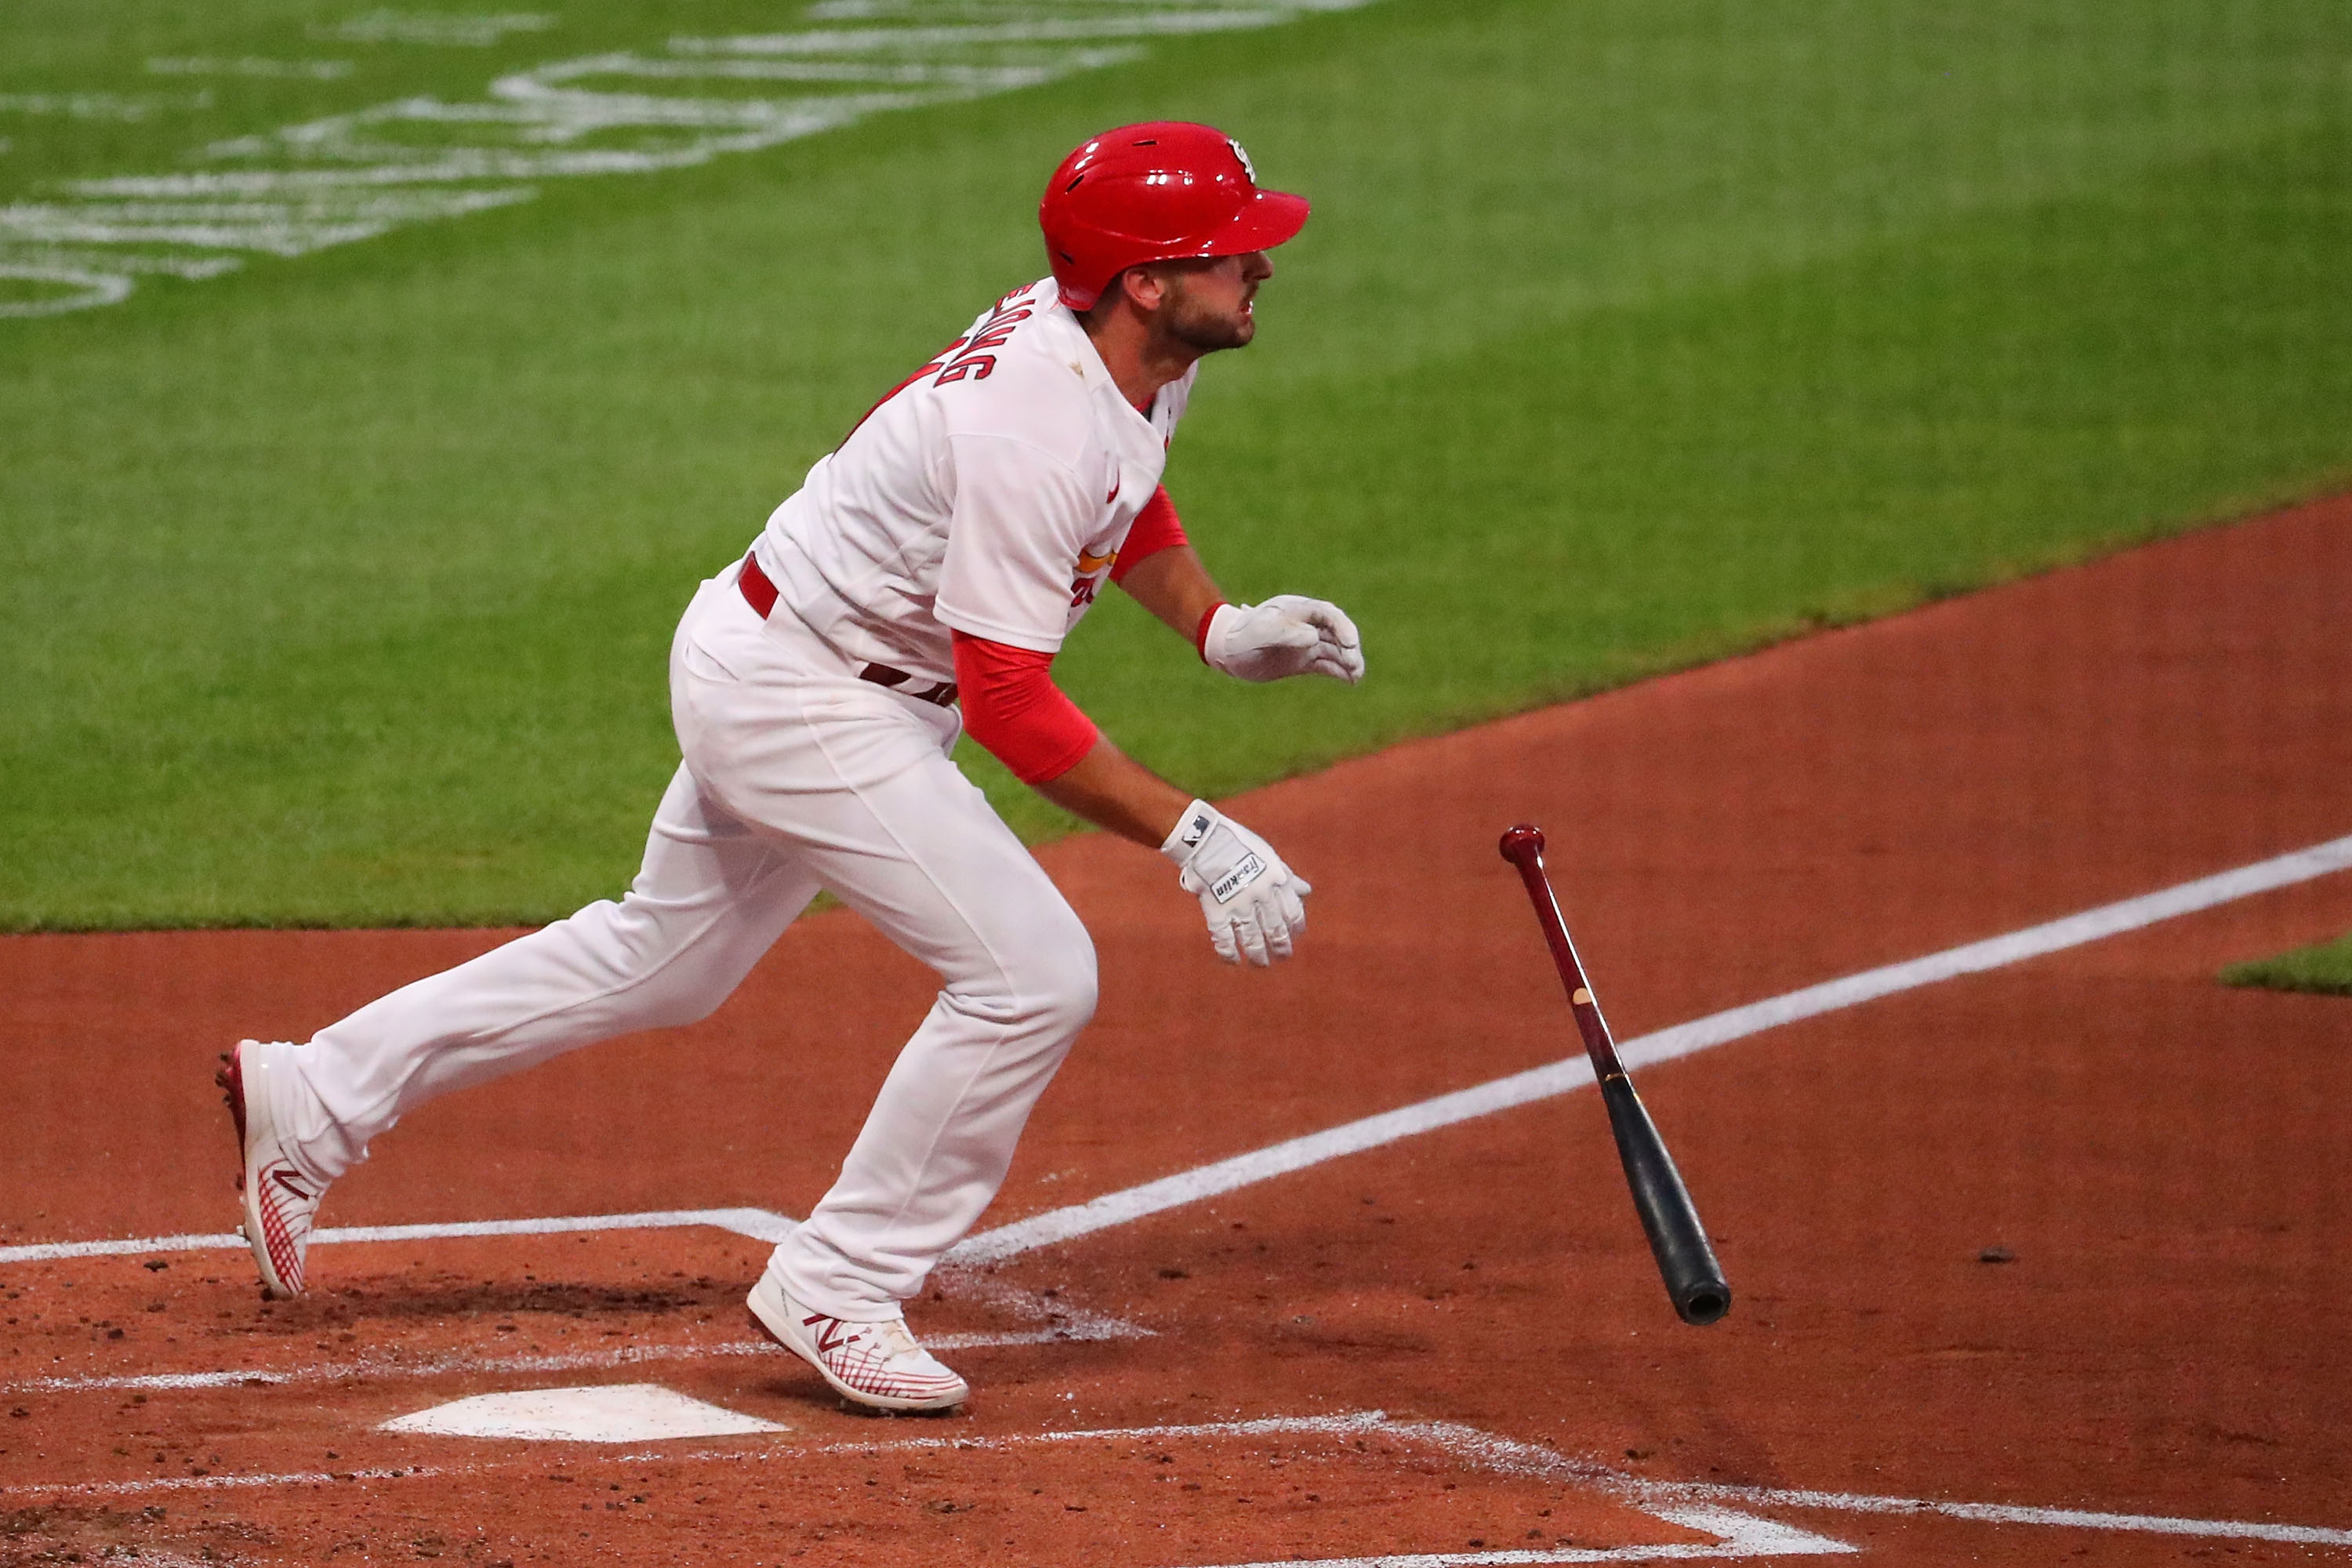 Paul DeJong #11 of the St. Louis Cardinals hits a sacrifice RBI fly ball against the Kansas City Royals in the first inning at Busch Stadium on August 24, 2020 in St Louis, Missouri.